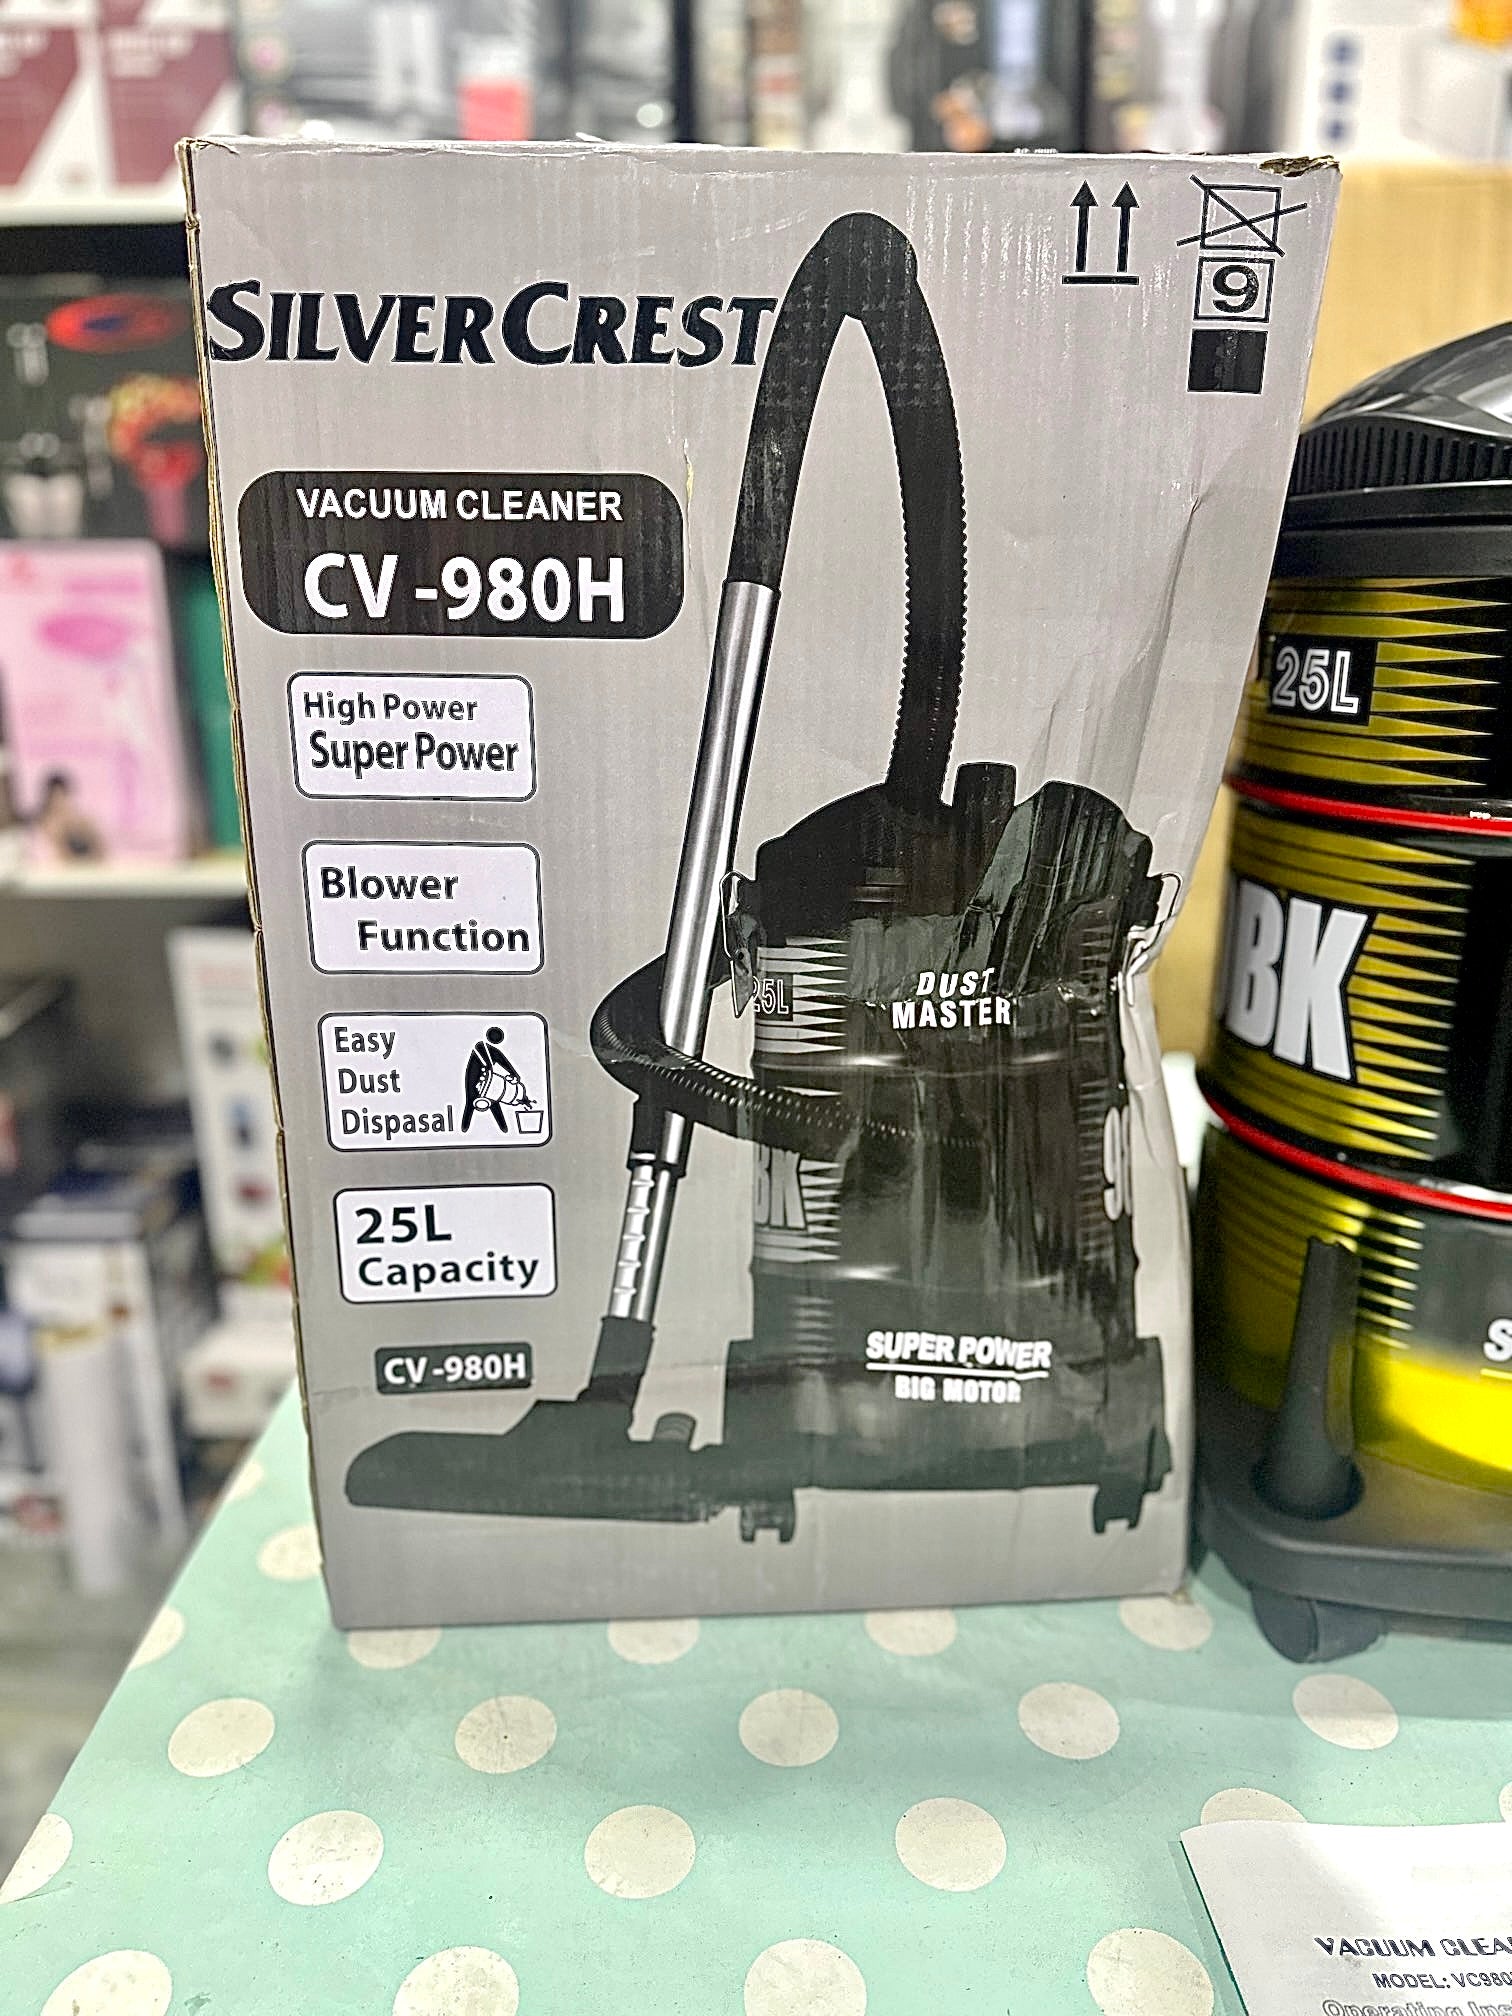 Lot imported Silver crest 2 in 1 dry and blow vacuum cleaner